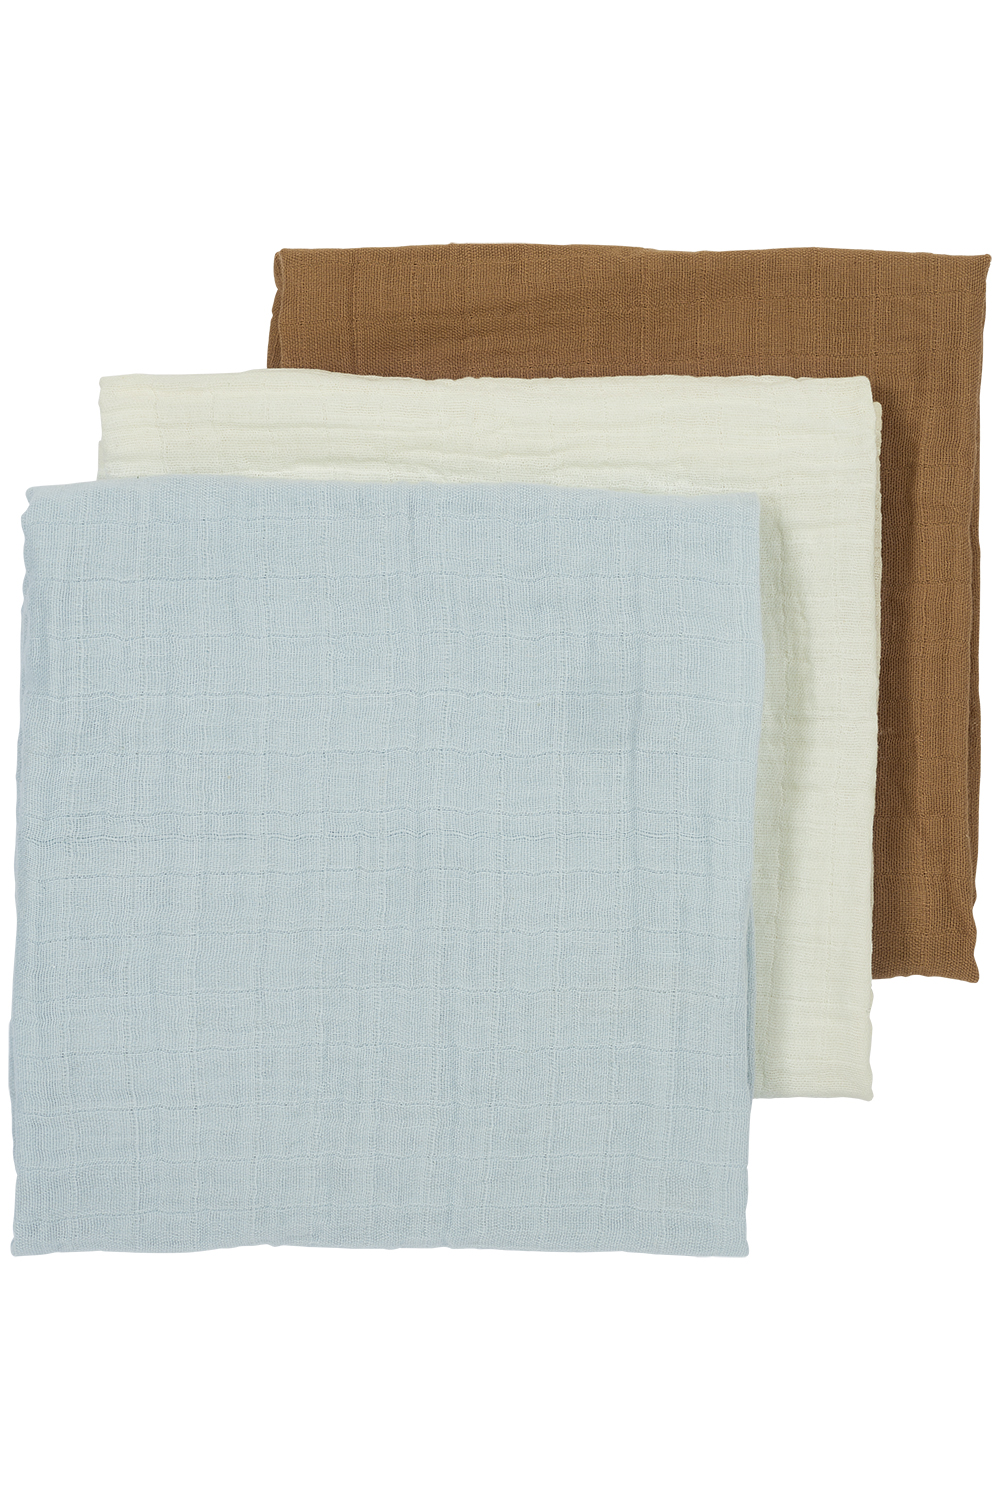 Pre-washed Musselin Mullwindeln 3er pack Uni - offwhite/light blue/toffee - 70x70cm